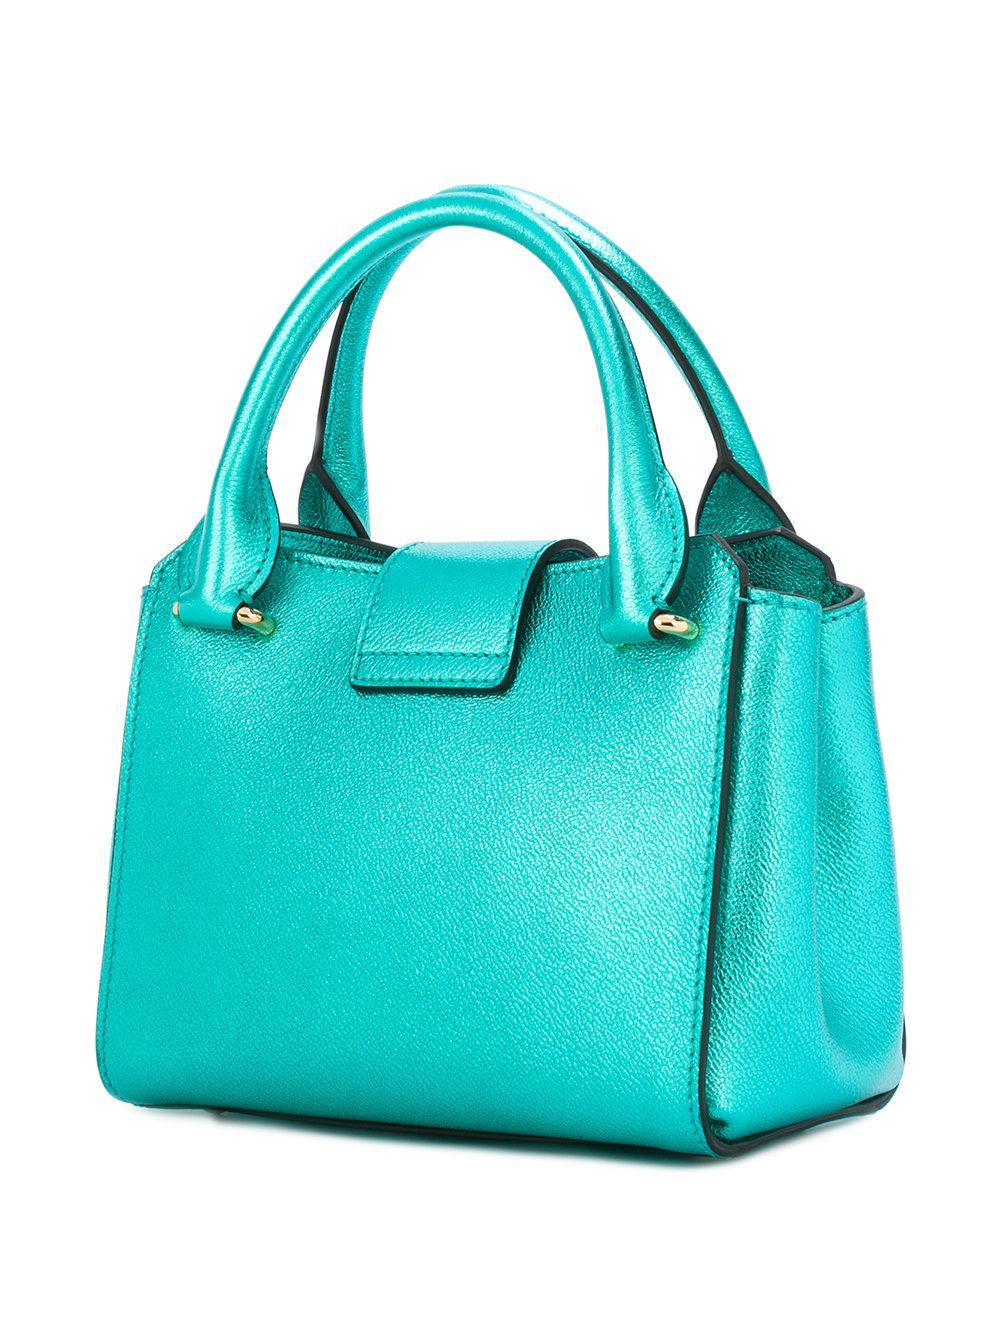 Lyst - Burberry Big Buckle Tote Bag in Green